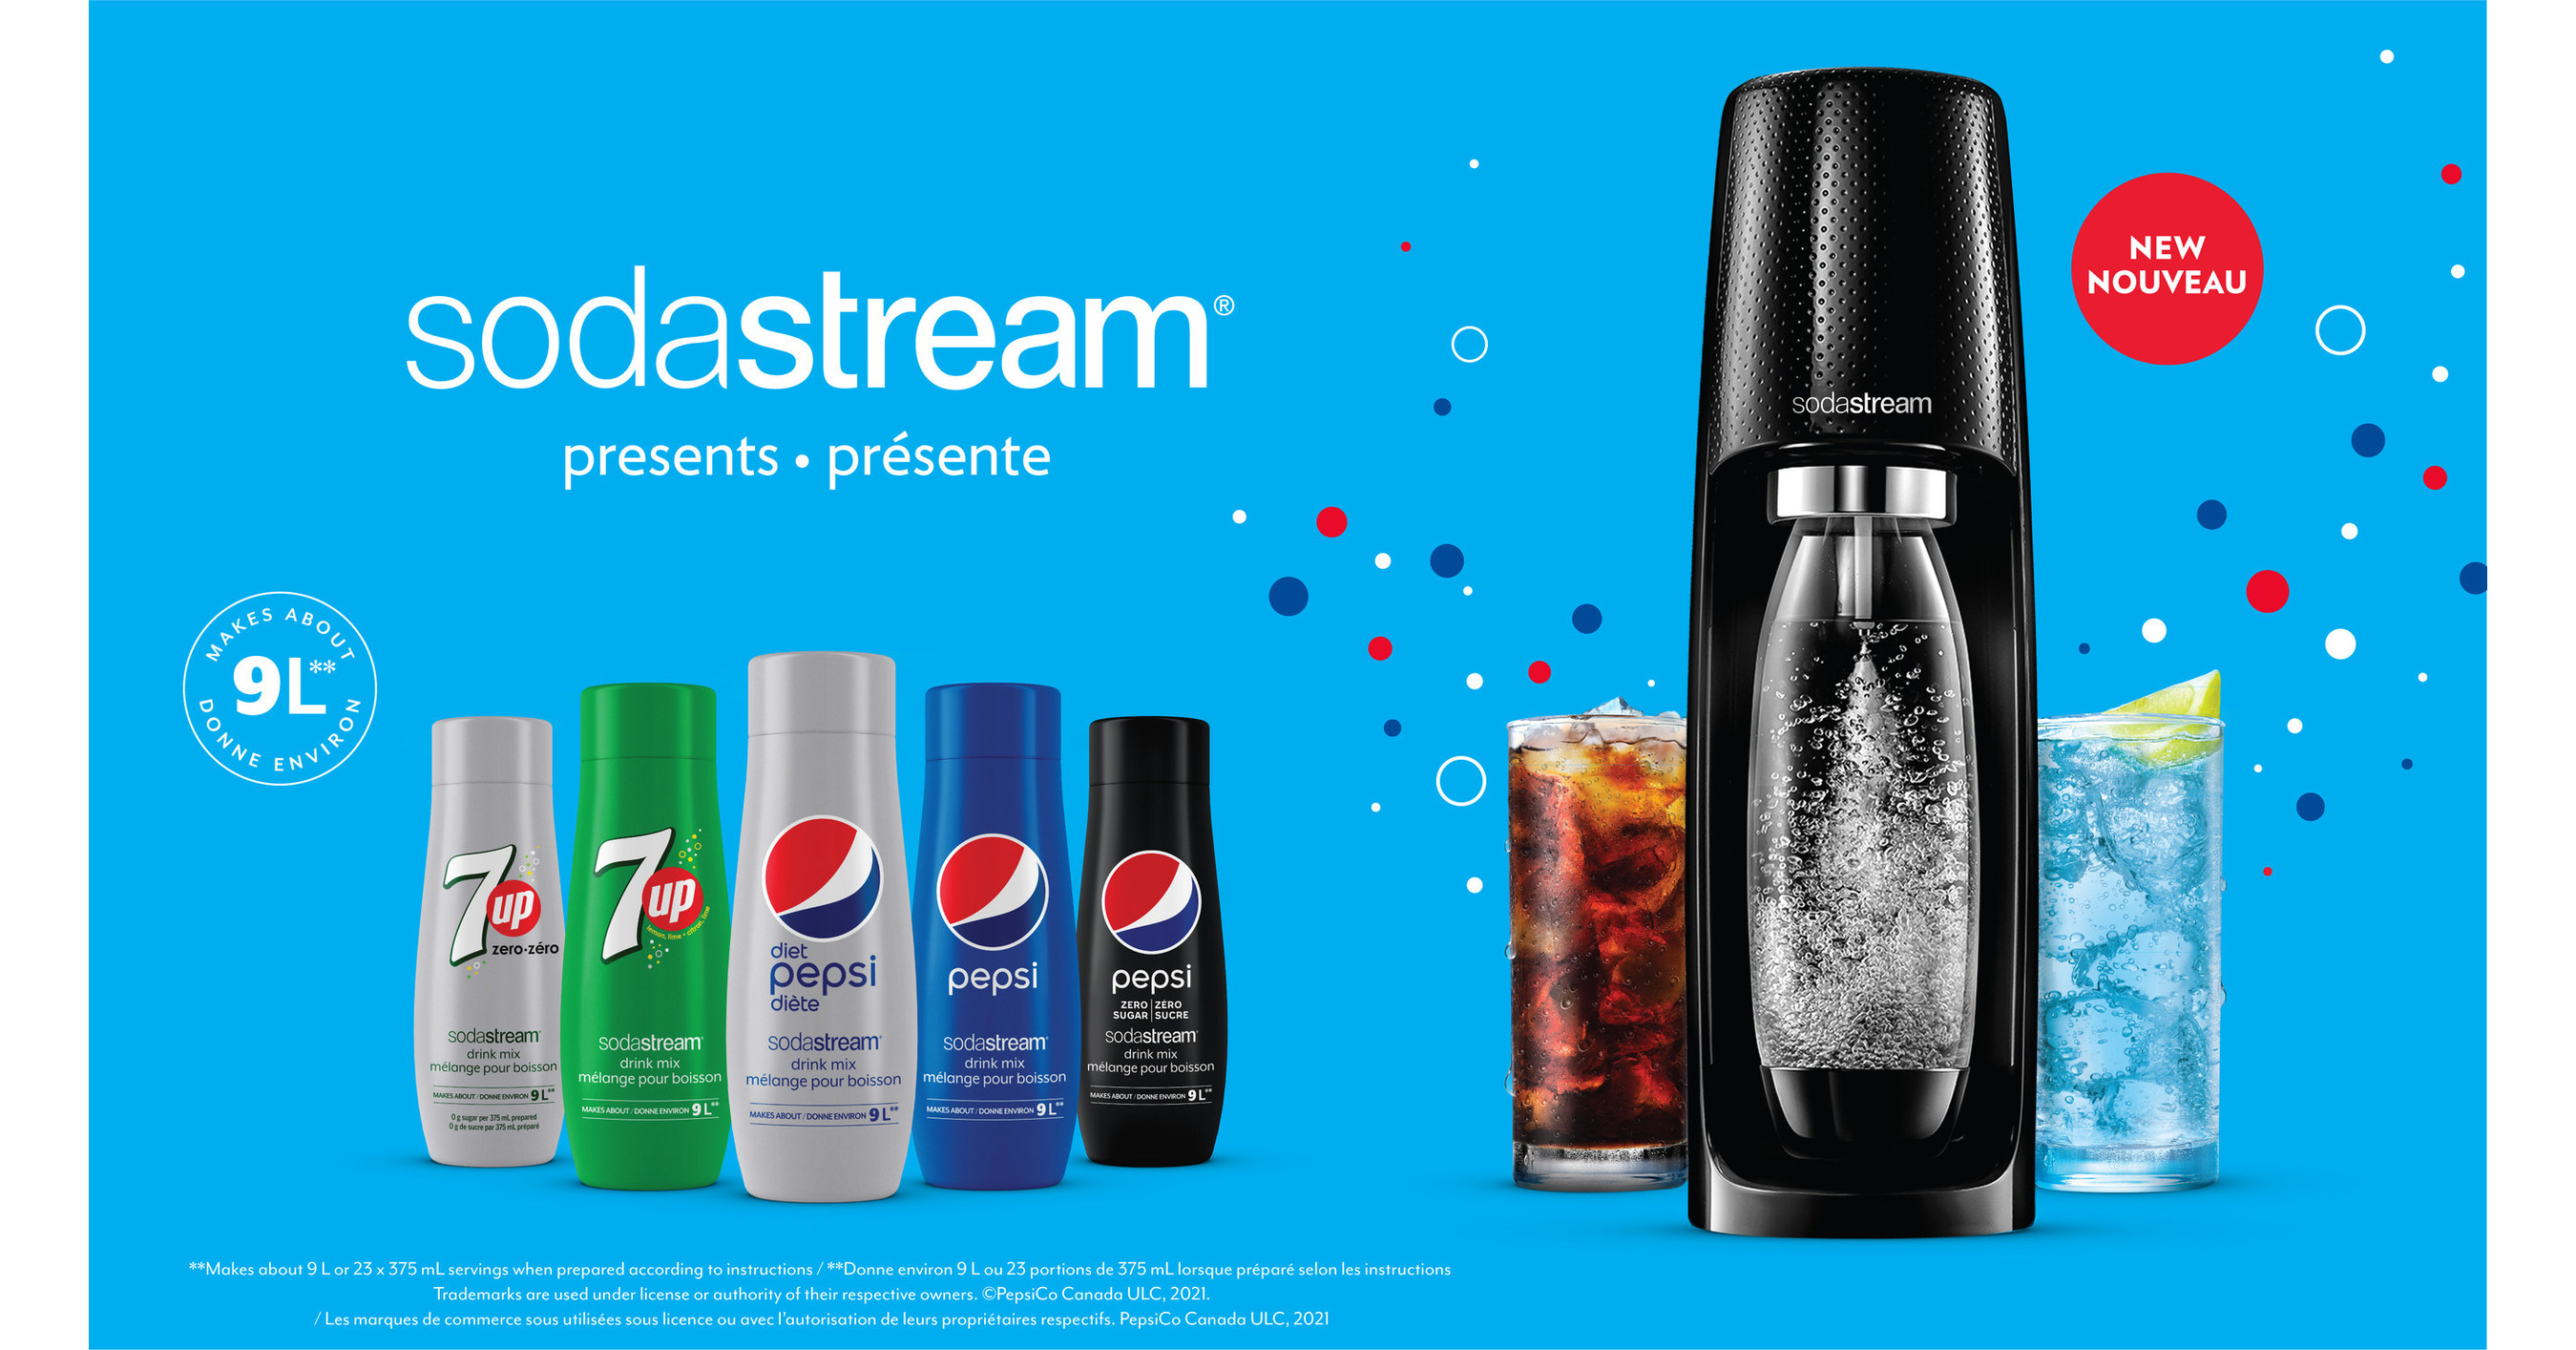 Pepsi to test its 'homemade' brands in SodaStream machines - FoodBev Media